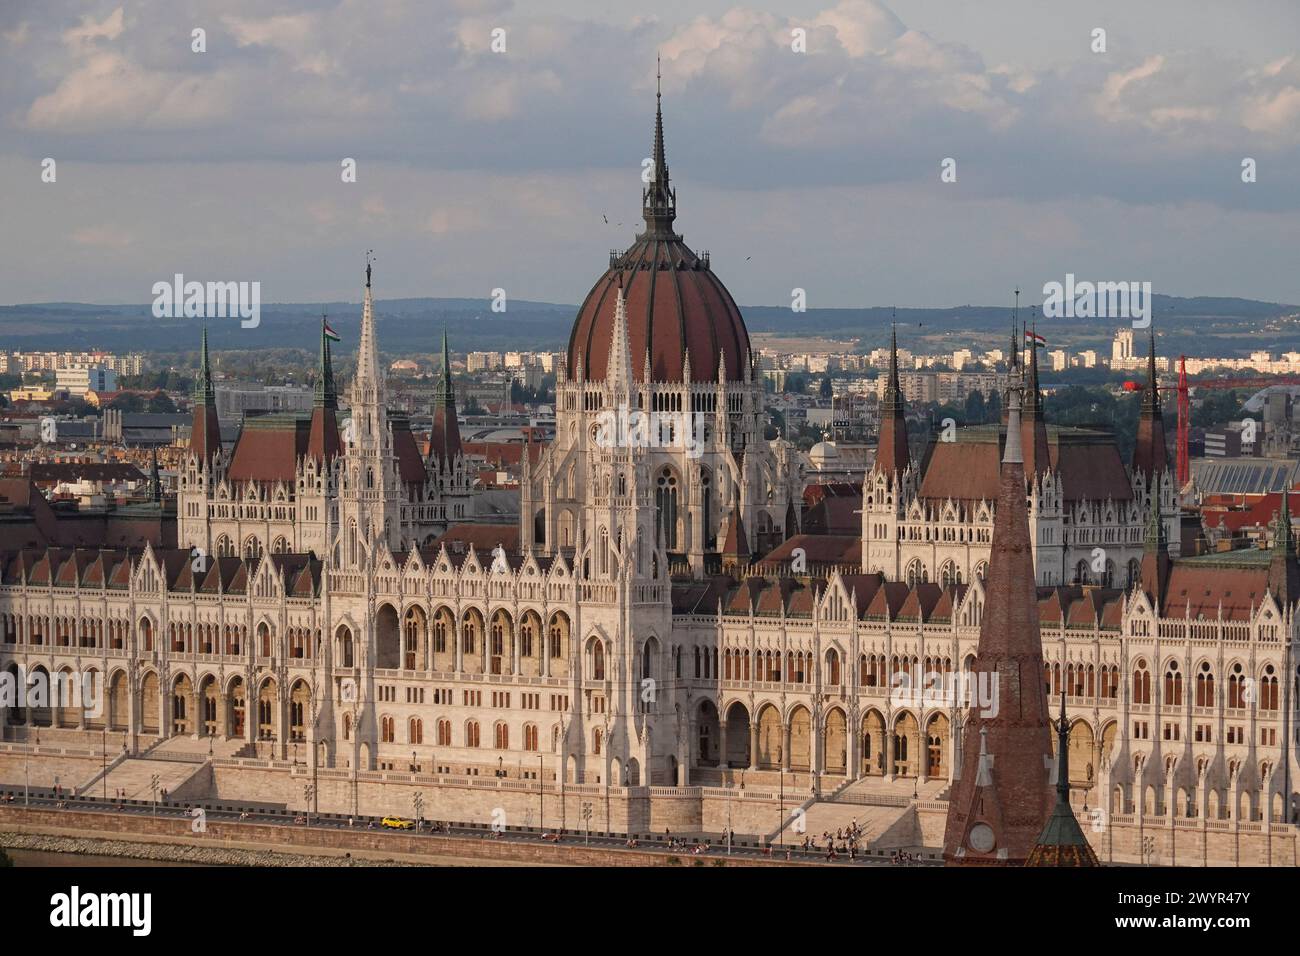 Hungary, Budapest, Panoramic view of the Neo-Gothic Hungarian Parliament building. The Hungarian Parliament Building also known as the Parliament of B Stock Photo